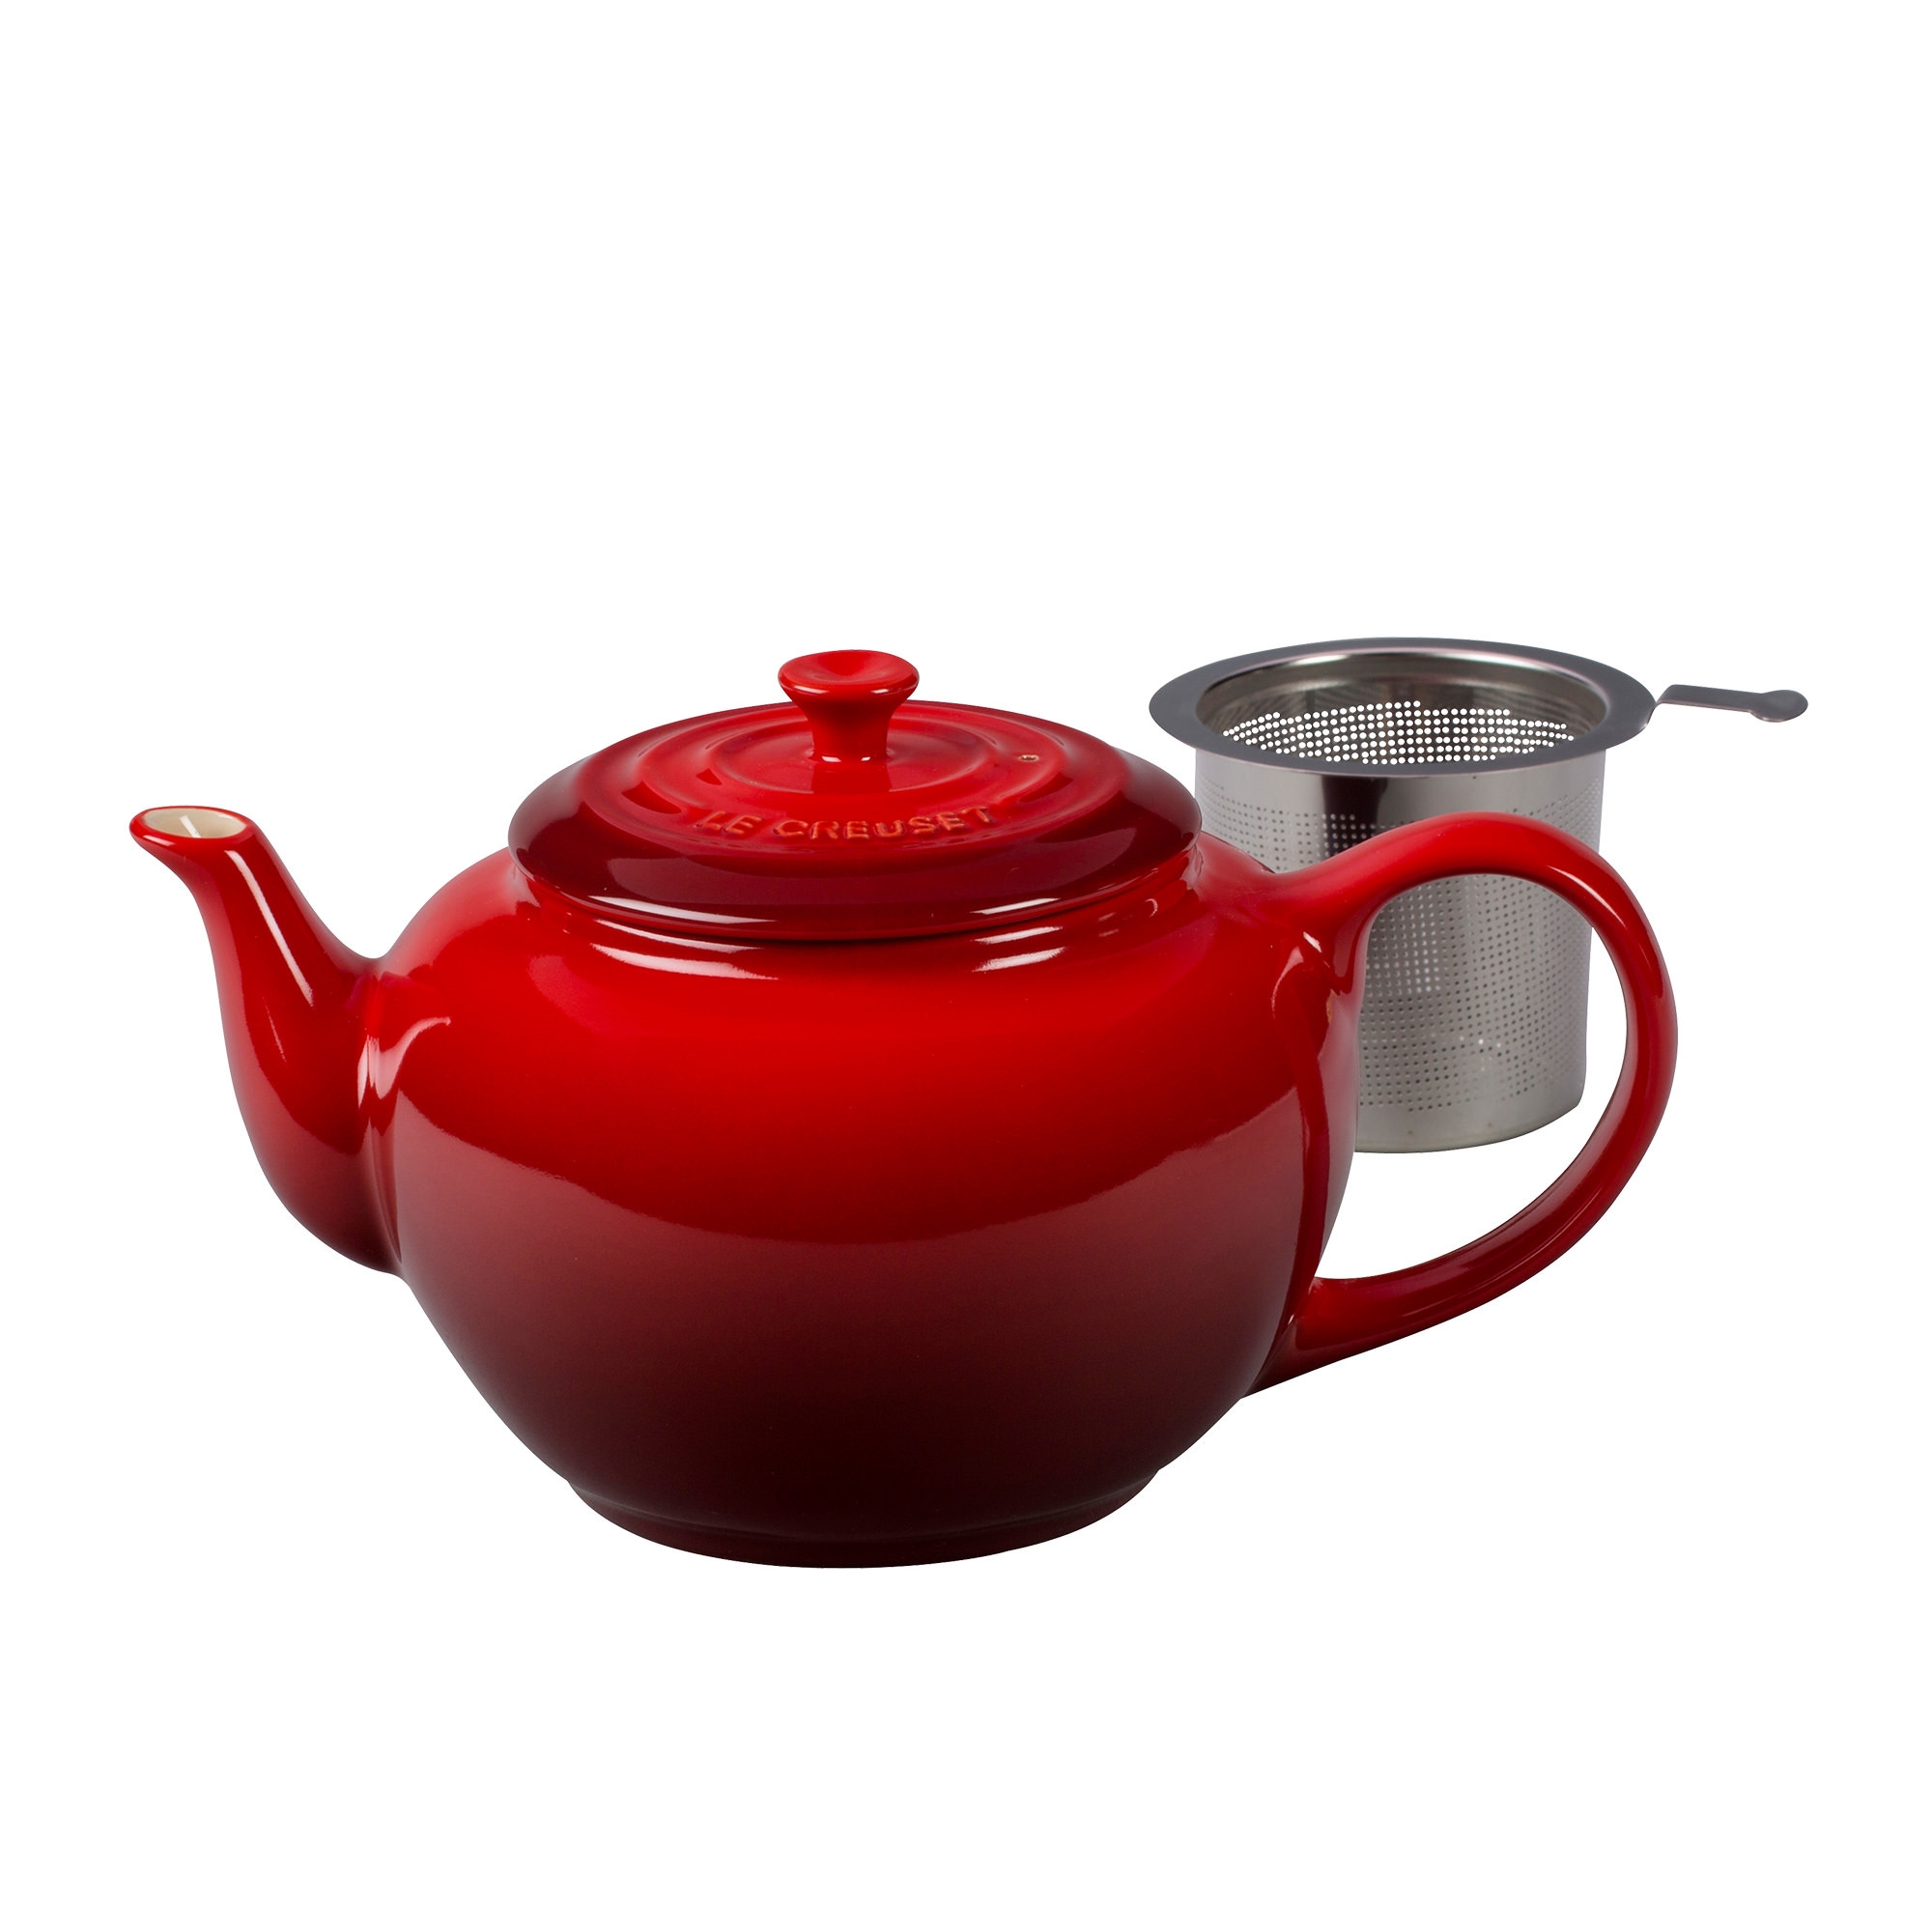 Le Creuset Classic Teapot with Stainless Steel Infuser 1.3L Cerise Image 1